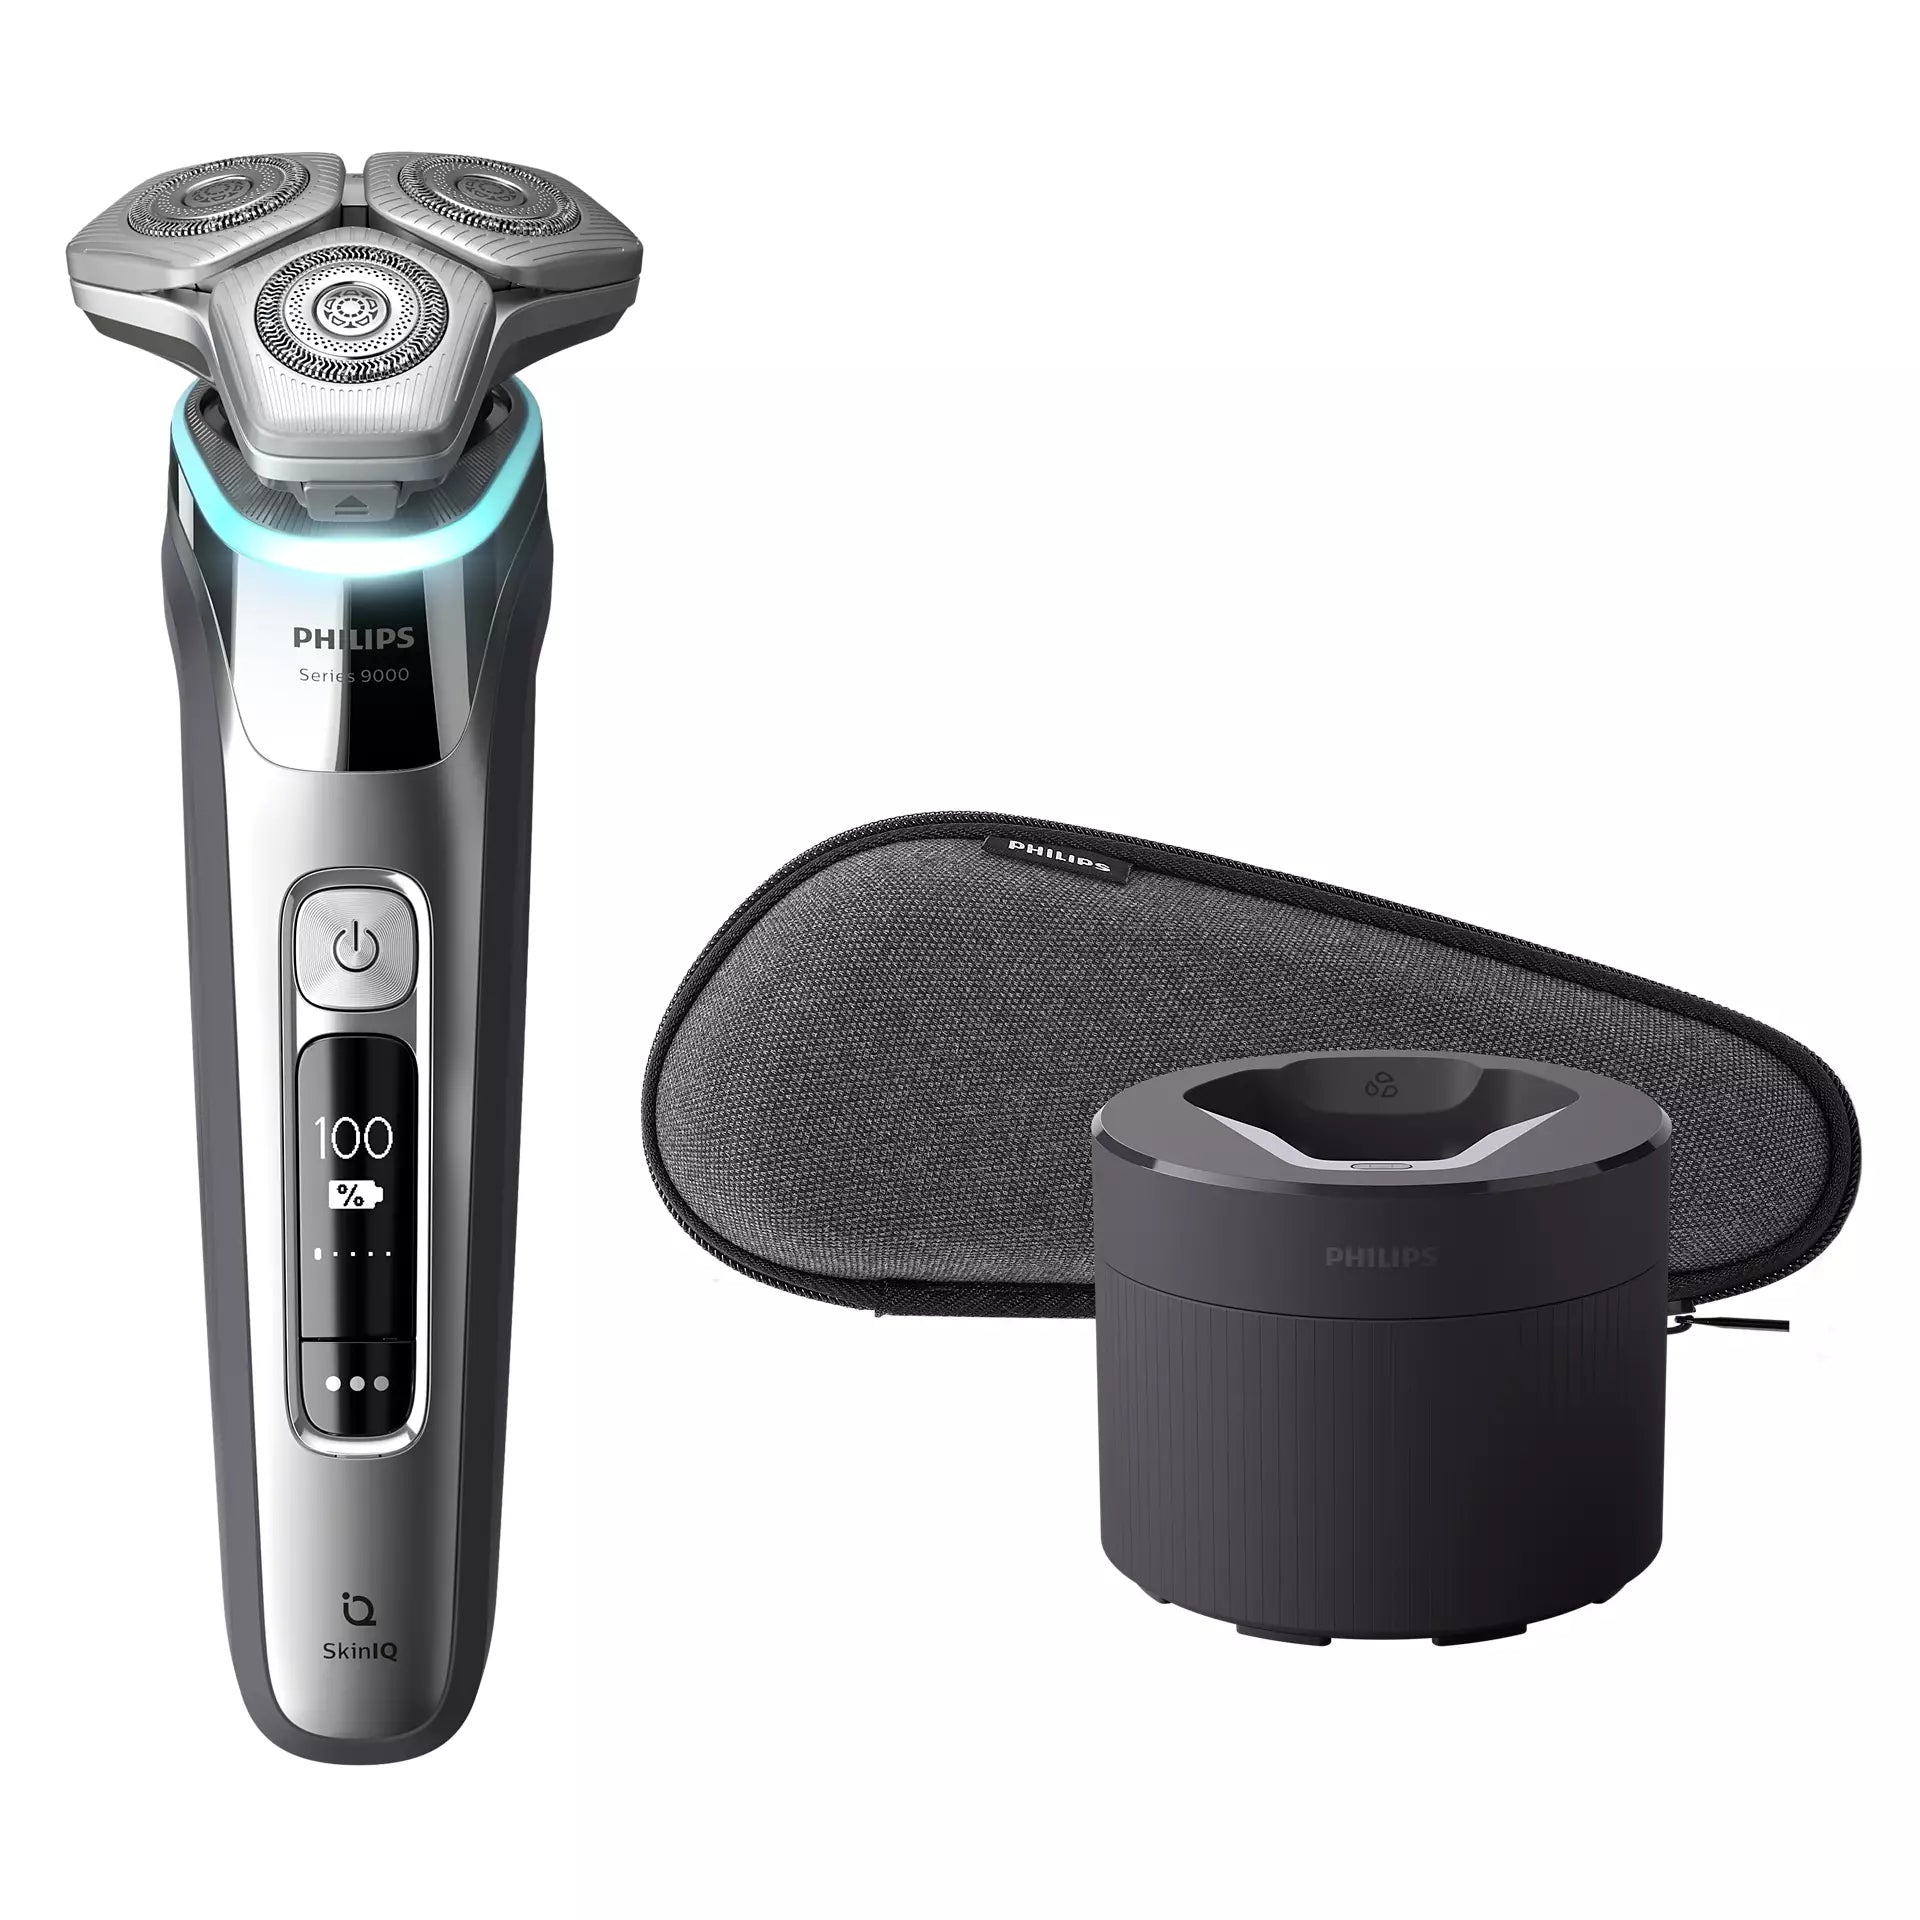 Philips Series 9000 Wet and Dry Electric Shaver S9985/50 with SkinIQ Technology